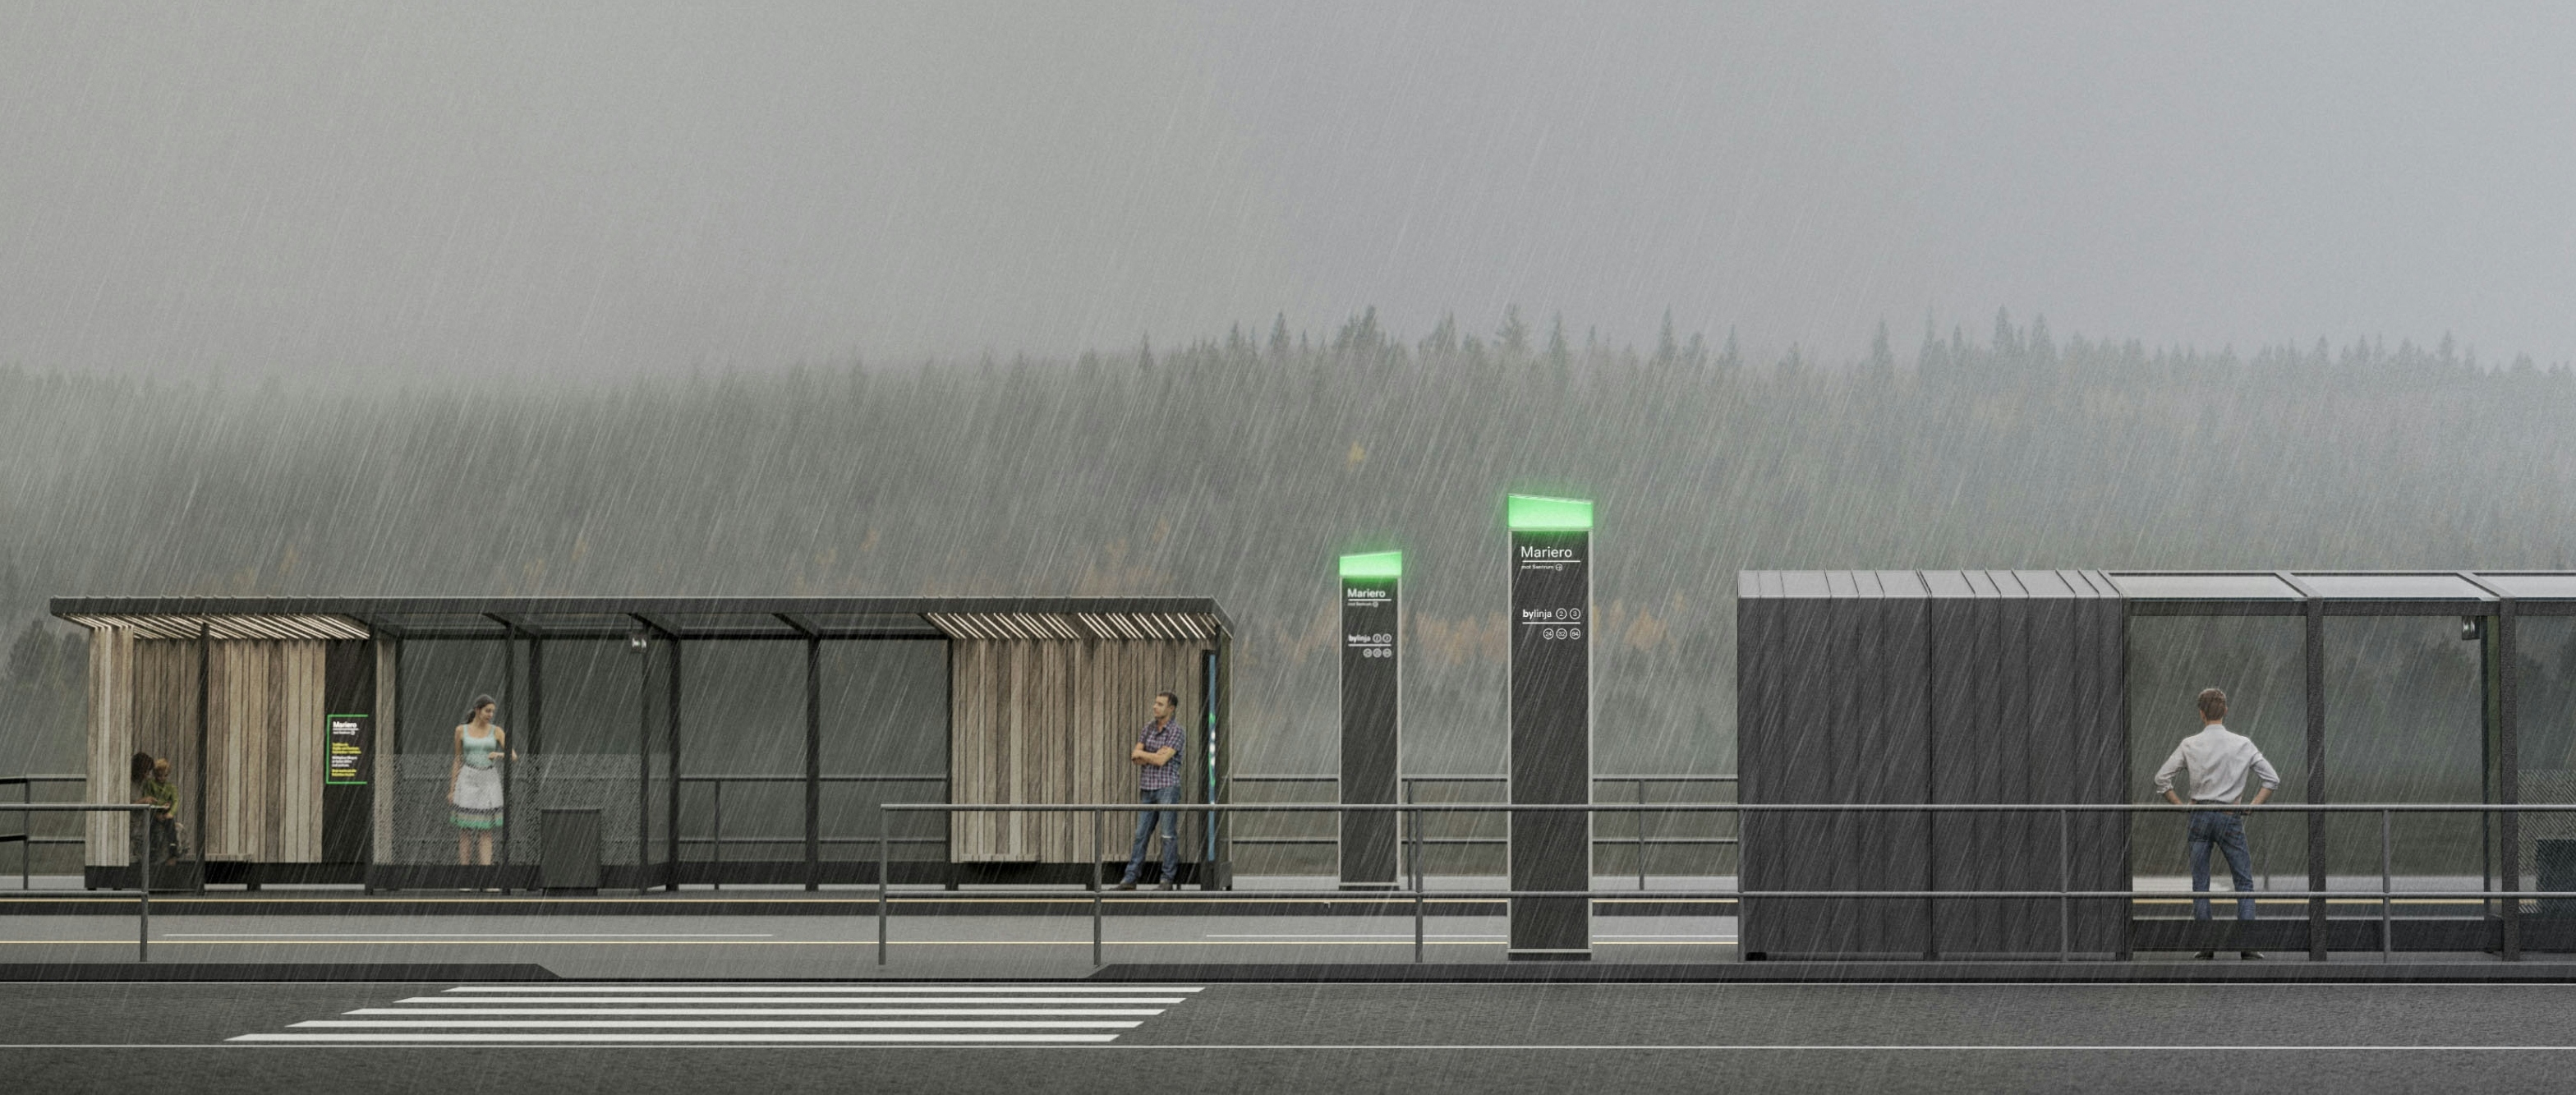 2 bus stops, one from the front and one from the back, with people waiting. Illustration.